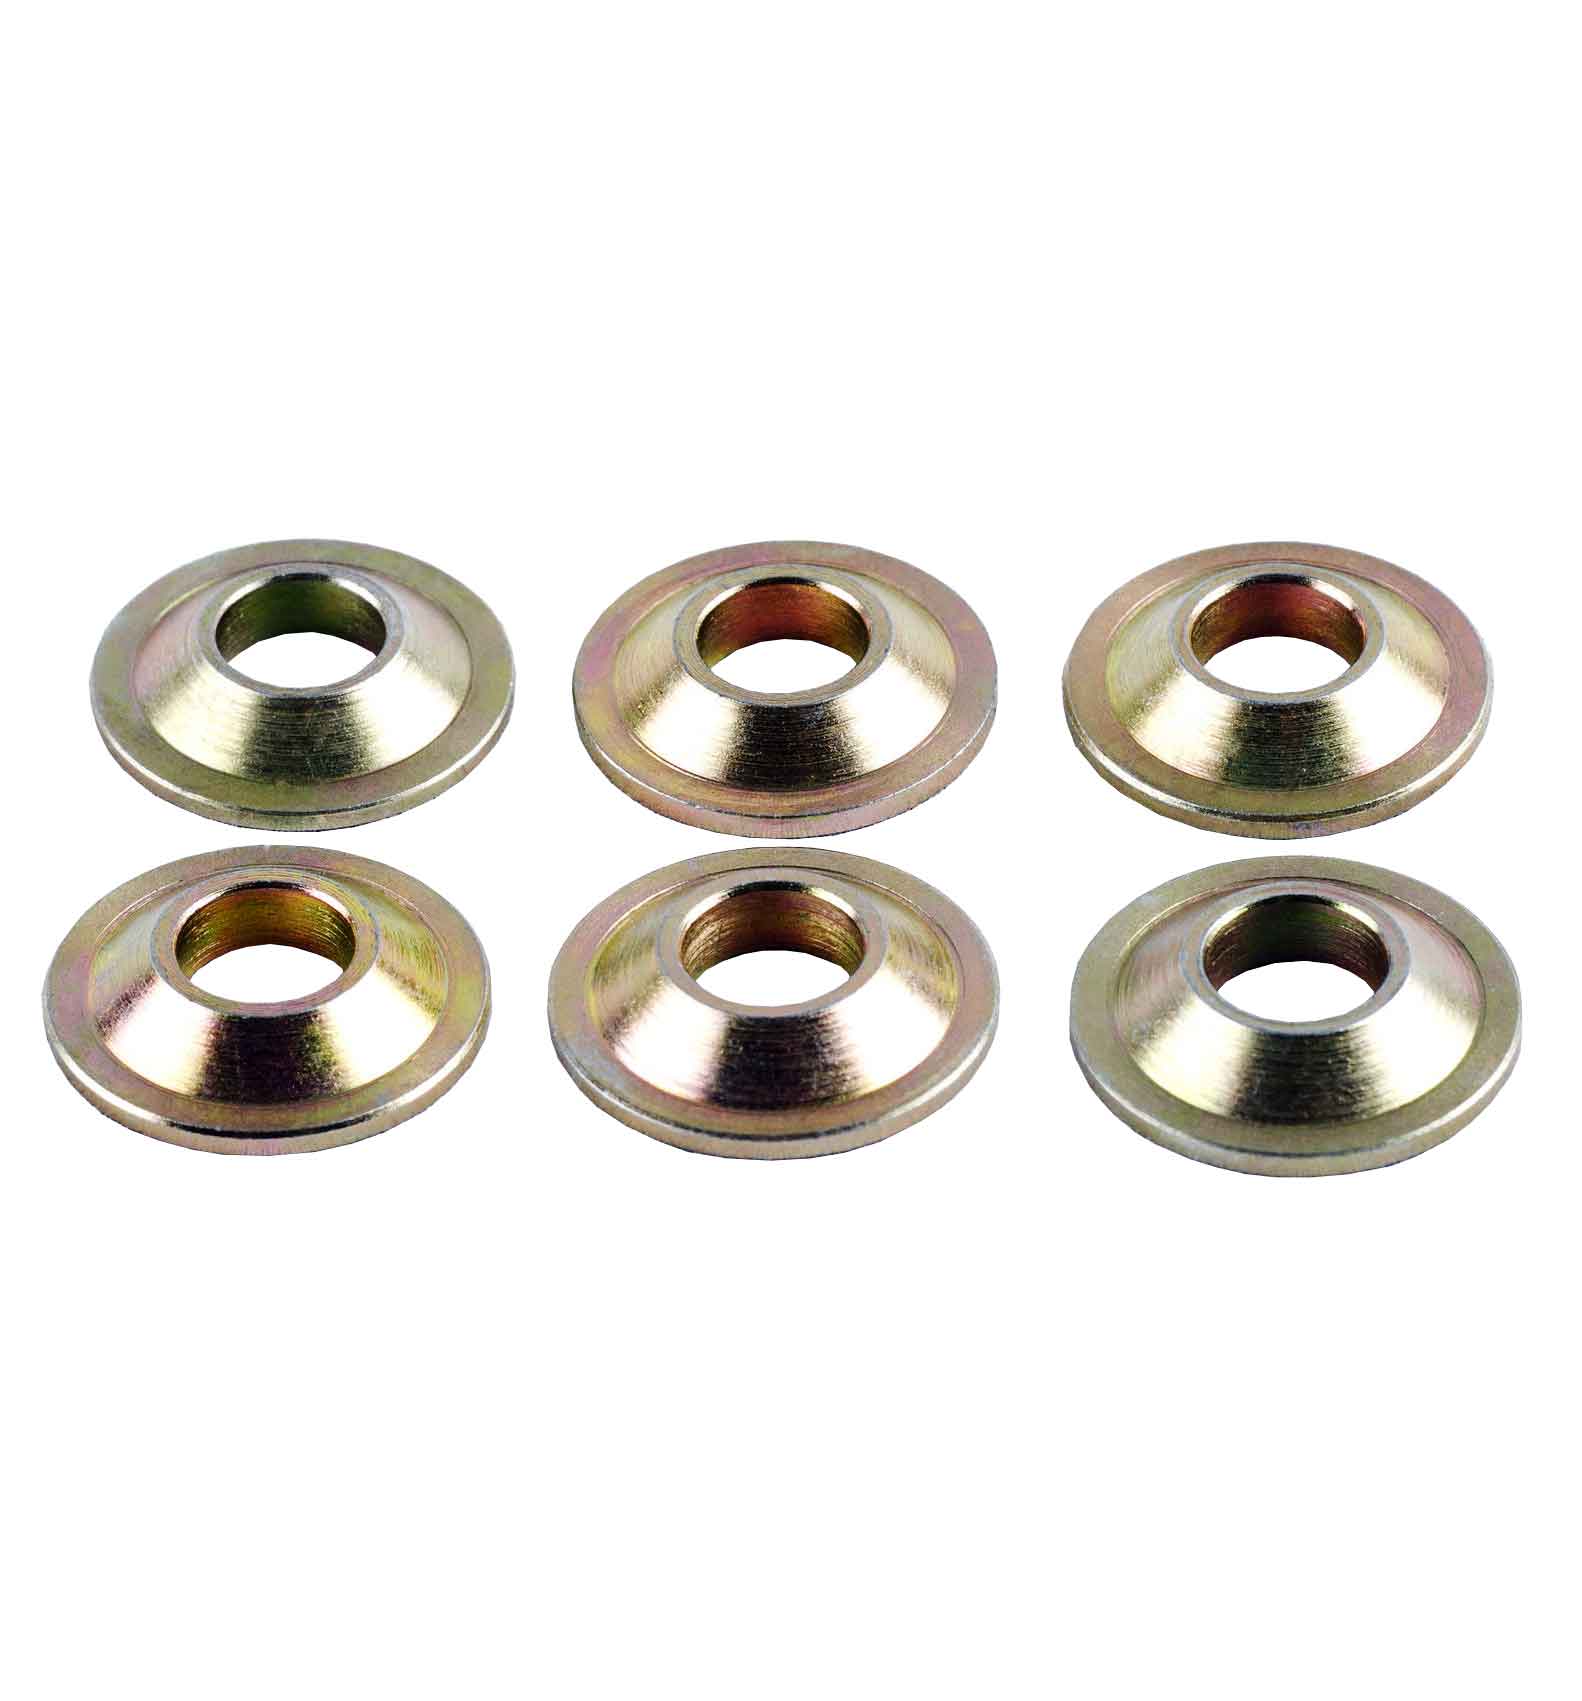 M8 Rod End Misalignment Spacers 8mm (Pack of 6)